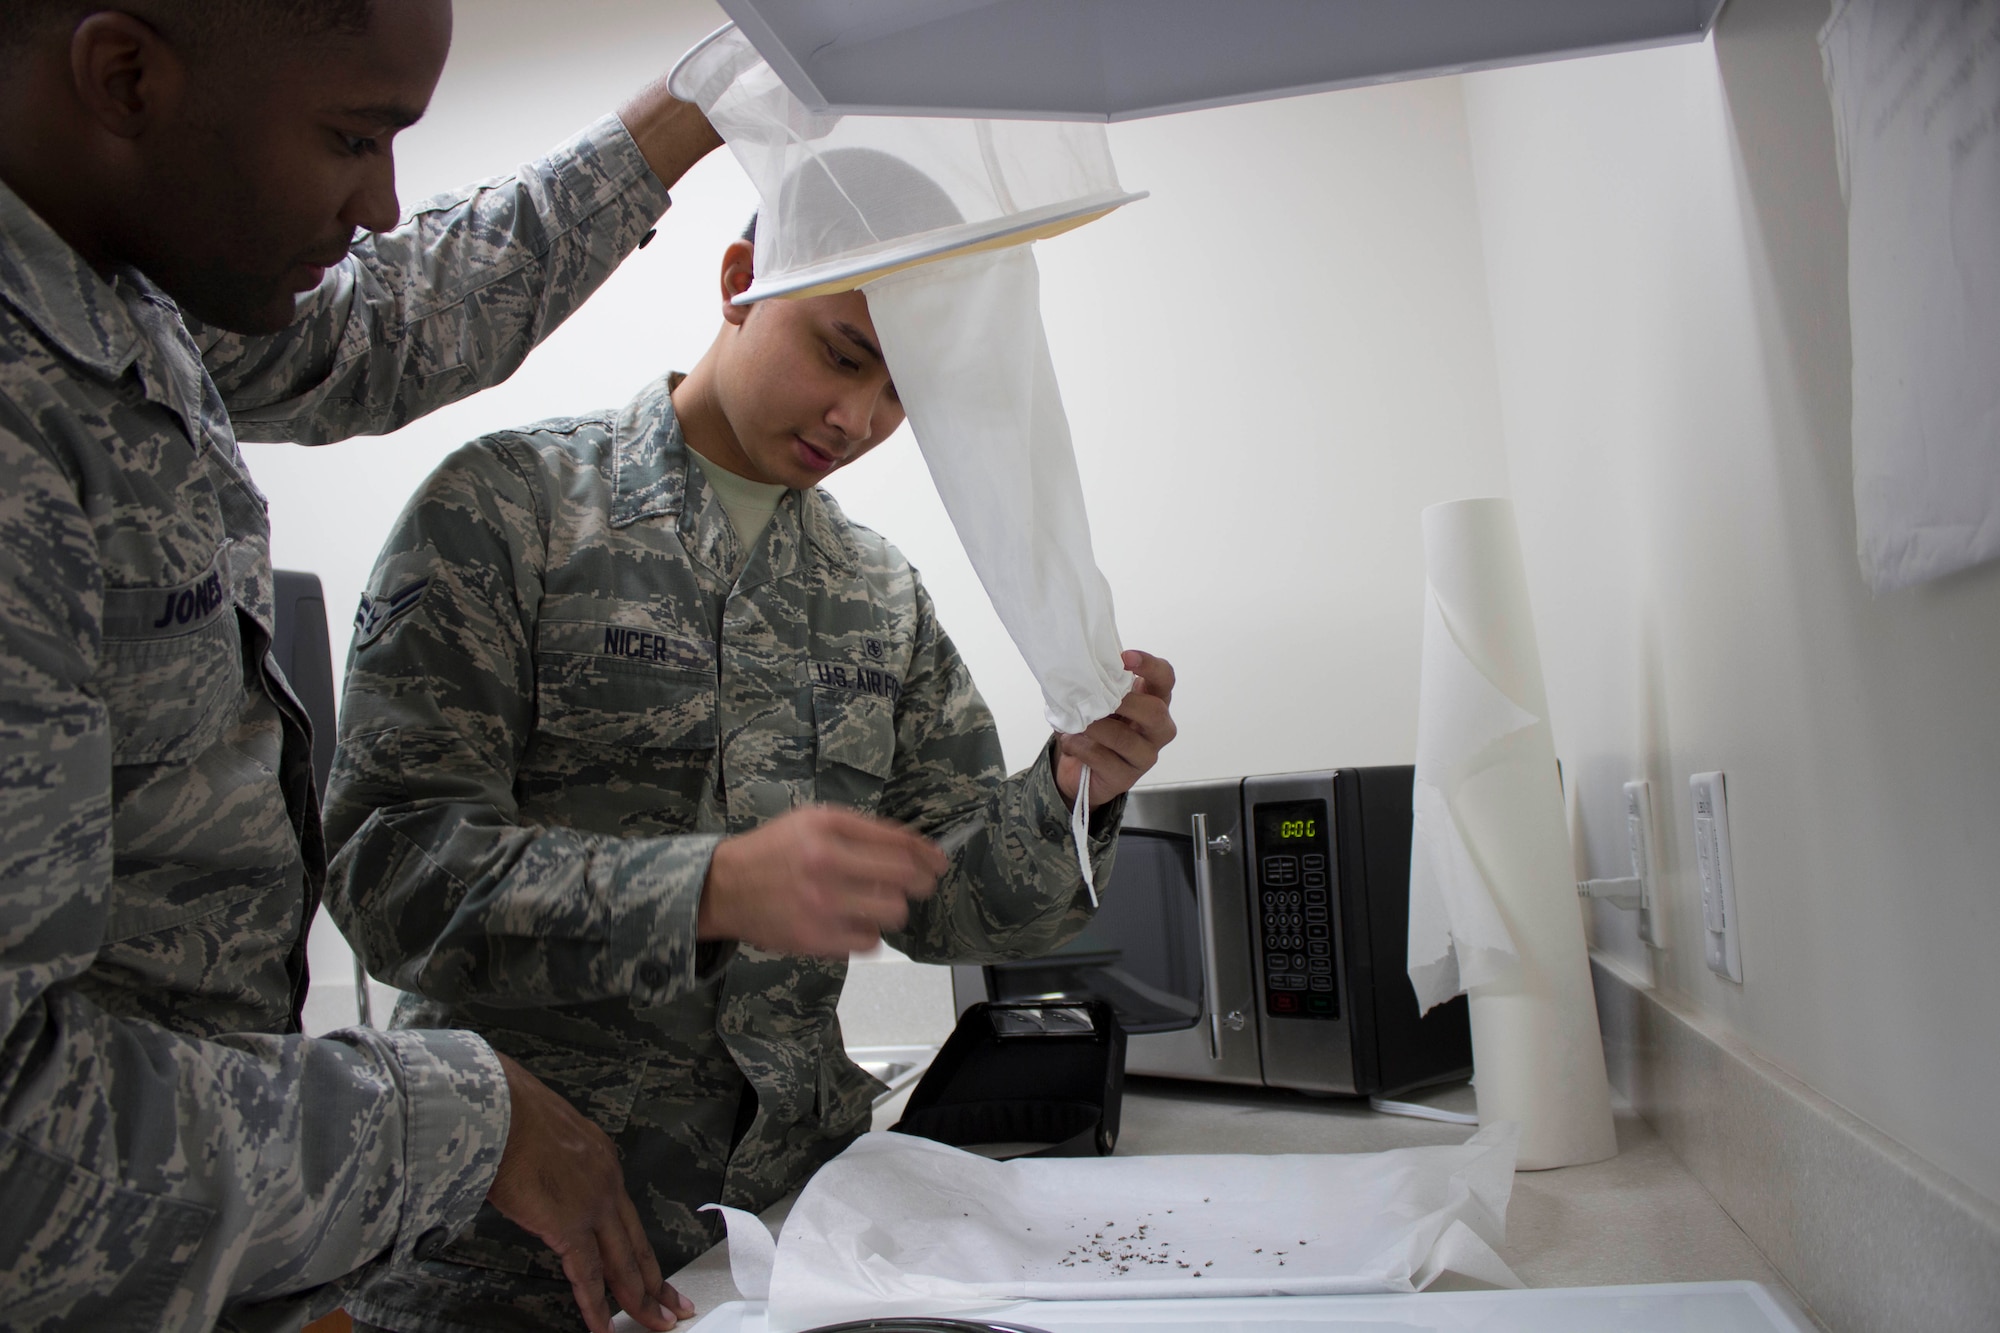 Staff Sgt. Derrick Jones and Airman 1st Class Stephen Nicer get ready to examine the contents of a mosquito trap at Eglin Air Force Base, Florida. (U.S. Air Force Photo/Susan Lawson)